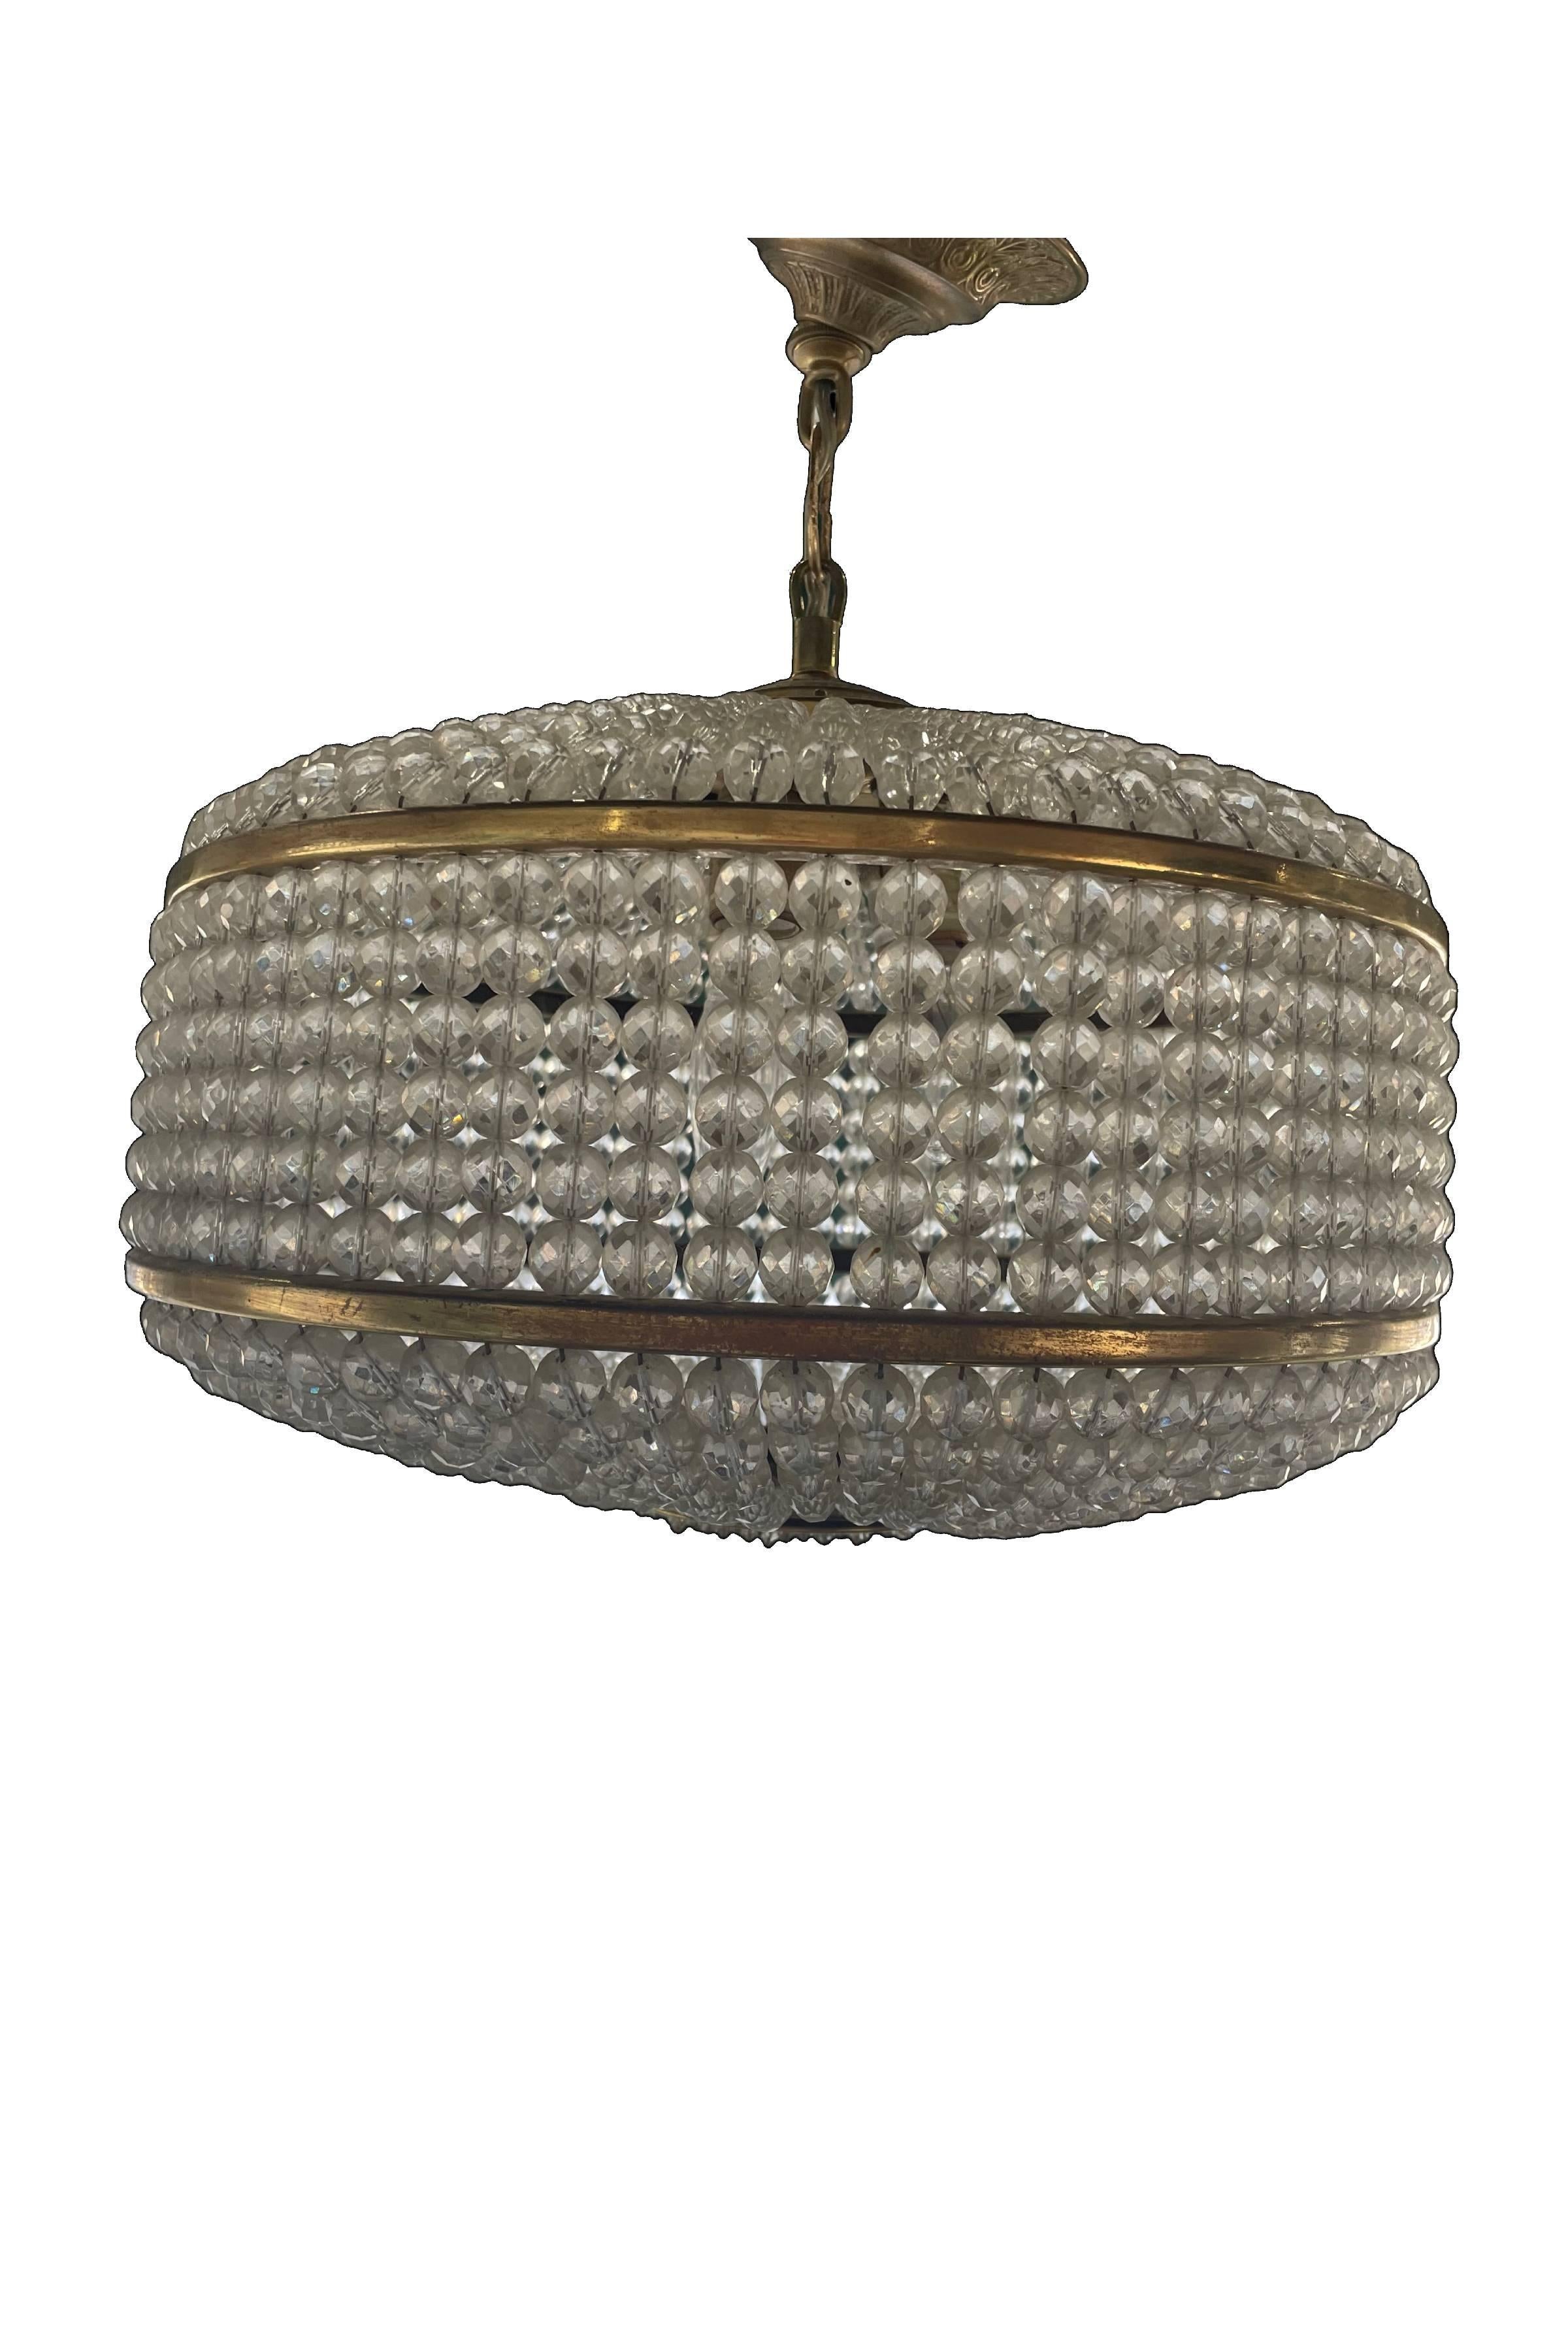 This Mid-Century Lobmeyr-style drum-shaped pendant fixture features hundreds of tightly, and, oh so symmetrically strung 3/4” to 1/8” glass crystals framed by two brass rings which form its base. A sparkling and elegant example of precise